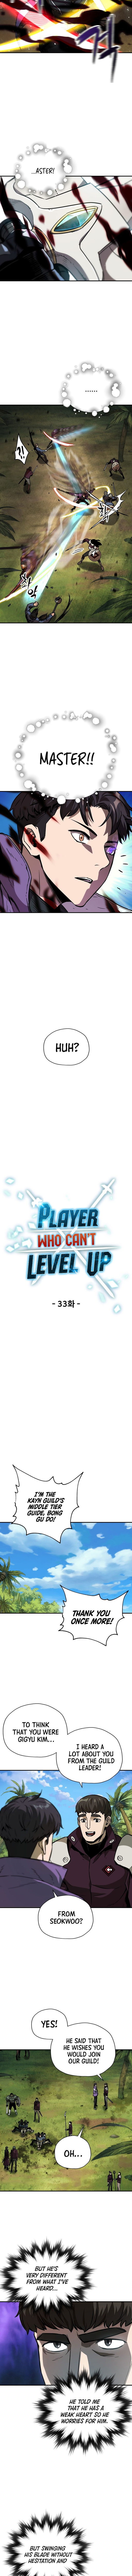 the-player-that-cant-level-up-chap-33-3